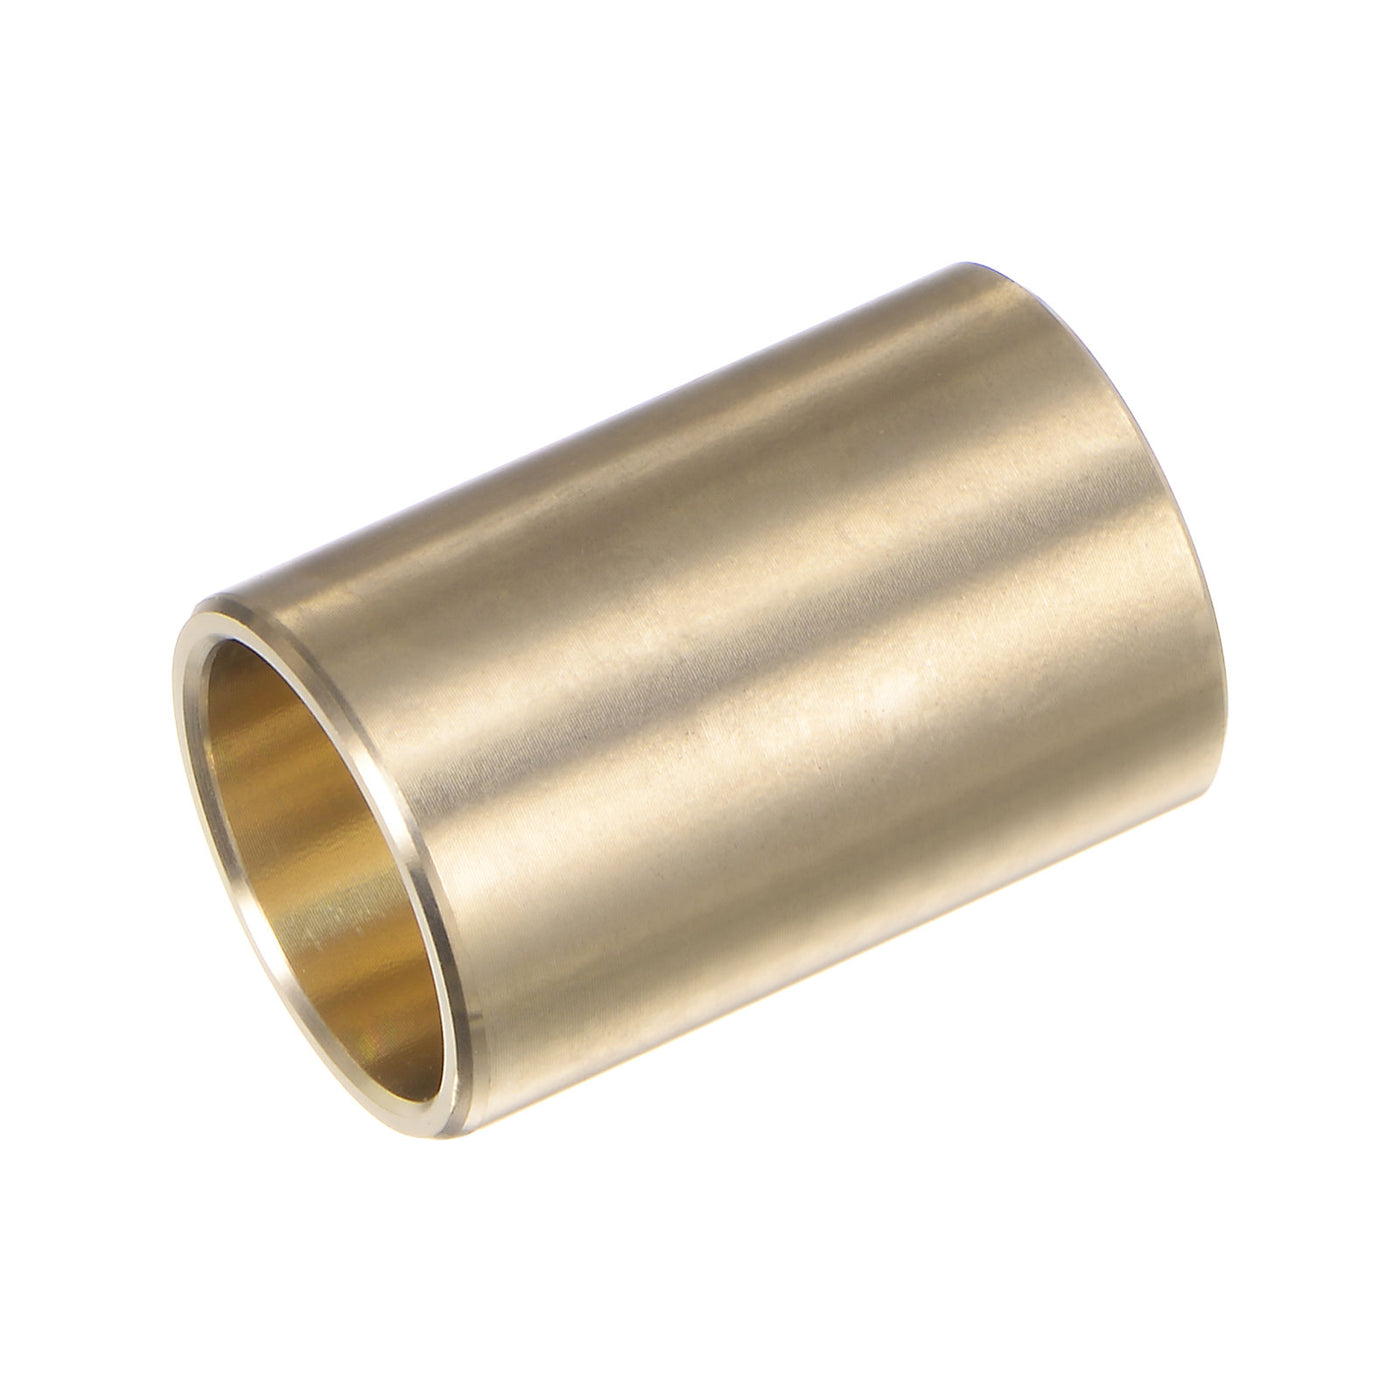 uxcell Uxcell 2pcs Sleeve Bearings 5/8" x 3/4" x 1-1/8" Wrapped Oilless Bushings Cast Brass